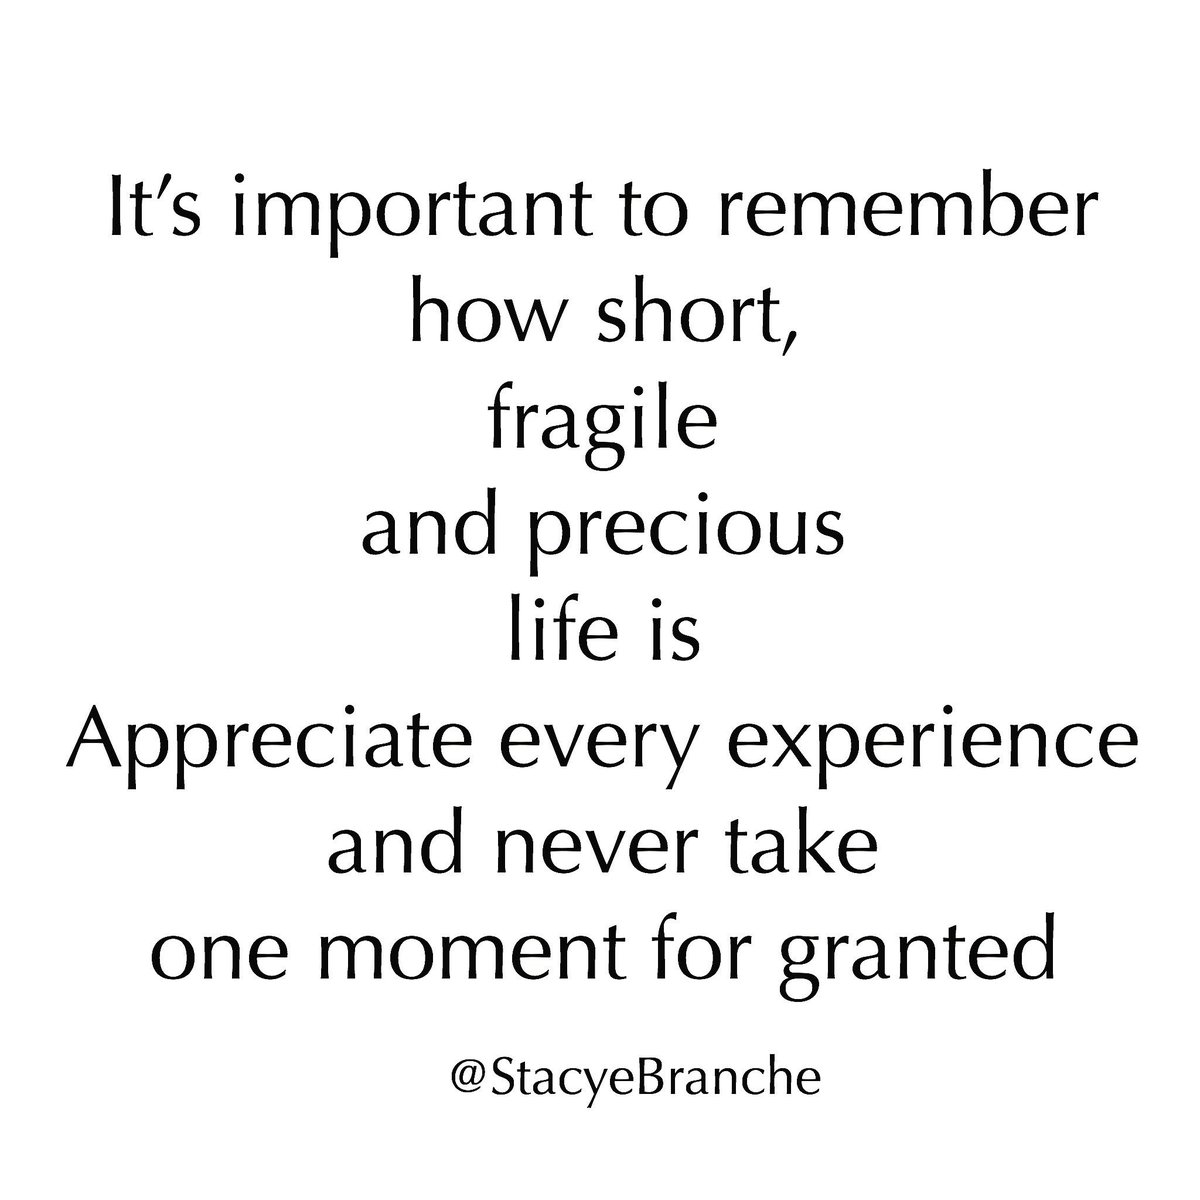 Stacye Branche On Twitter It S So Easy For Us To Get Caught Up In Our Every Day Experiences That We Forget Just How Amazing Life Is Tomorrow Isn T Promised Make The Most